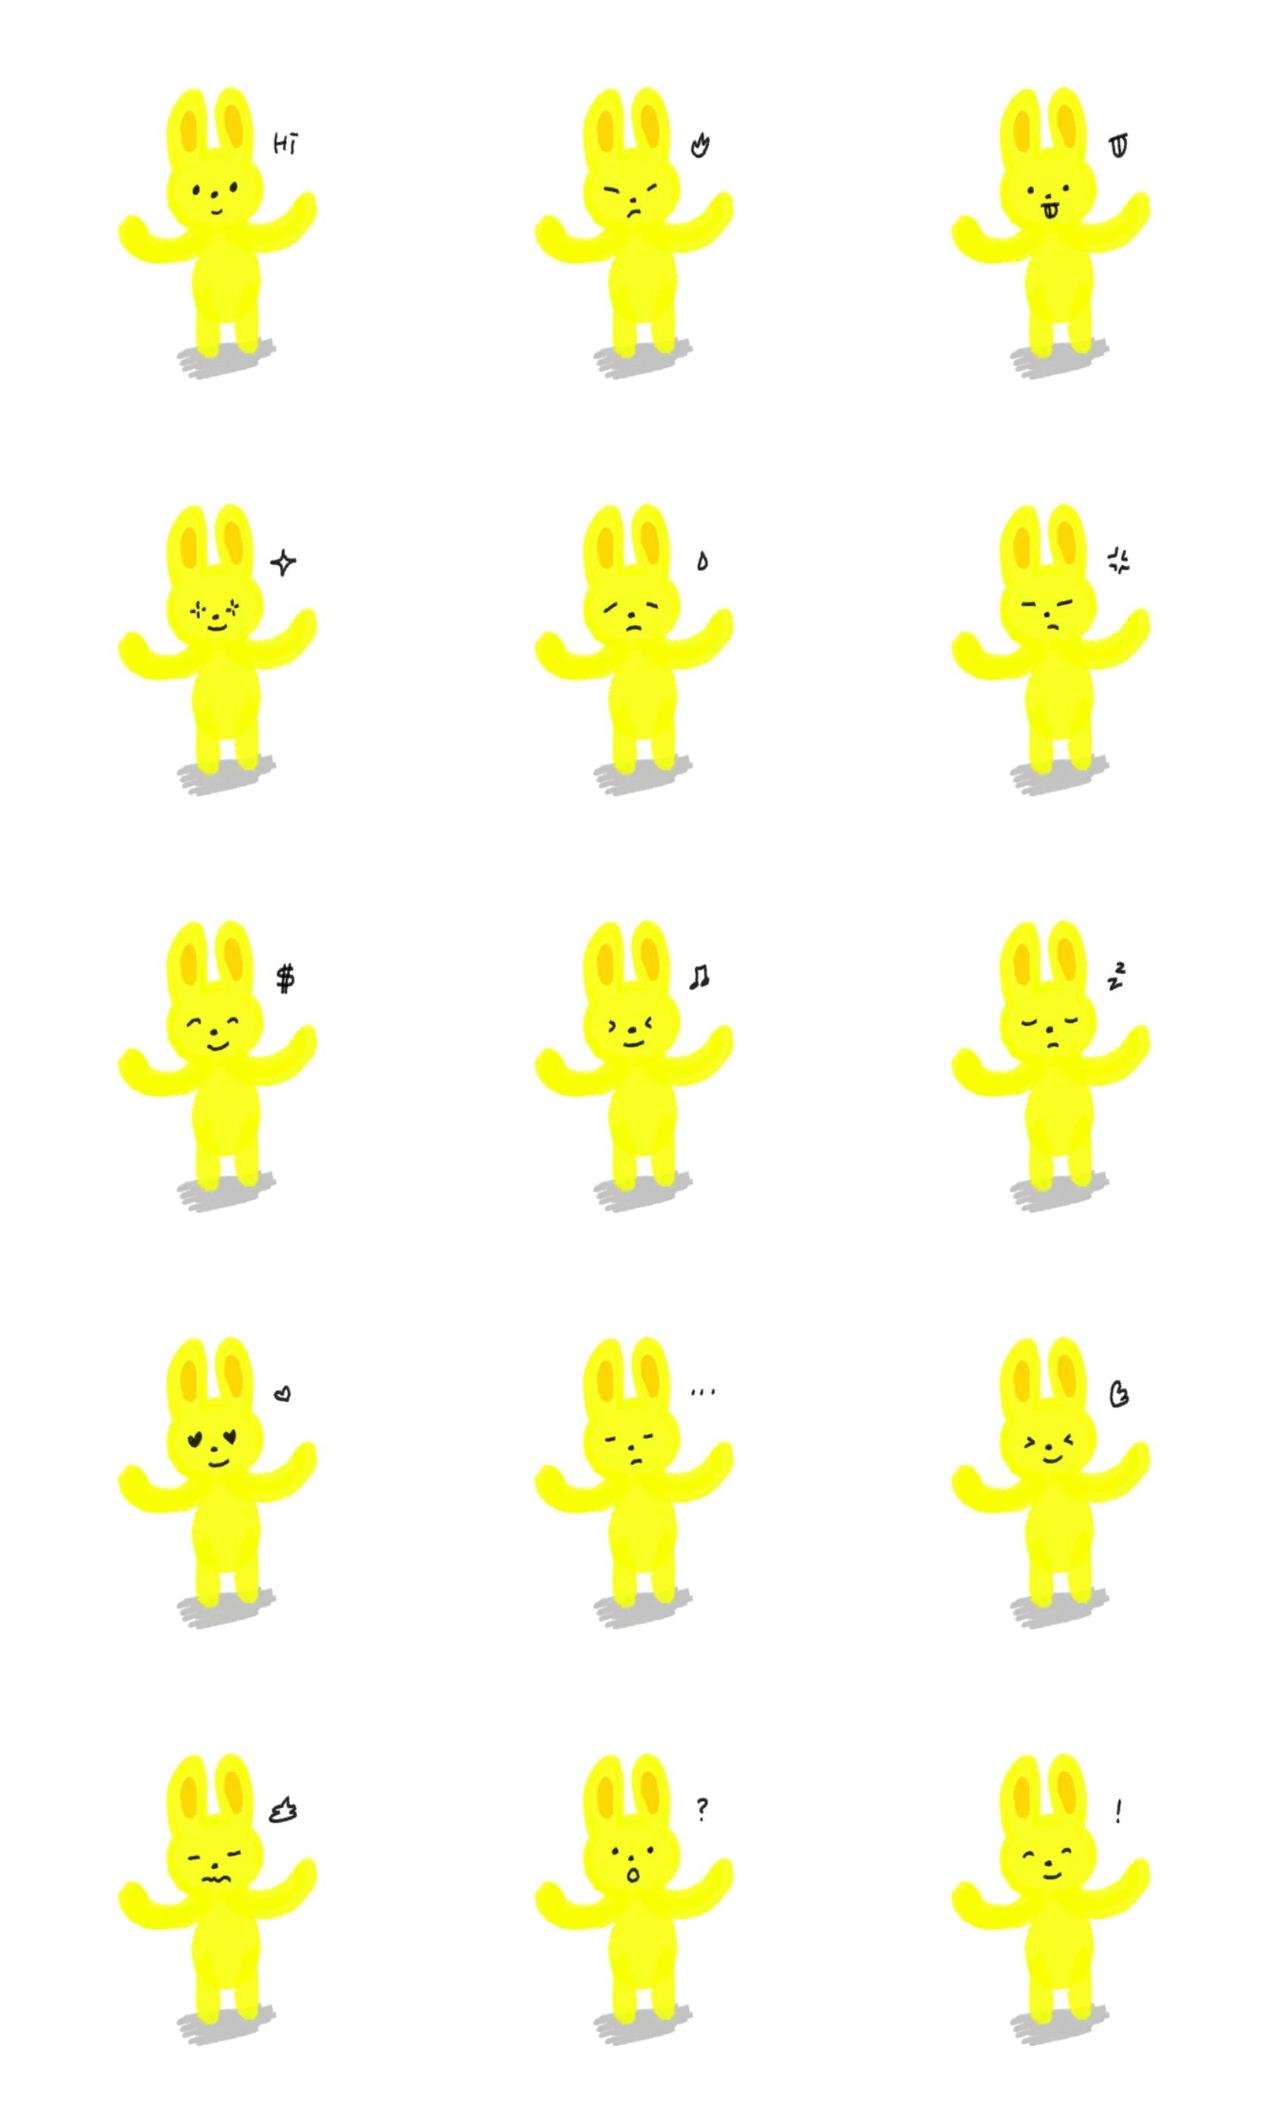 Yellow rabbit Animals sticker pack for Whatsapp, Telegram, Signal, and others chatting and message apps